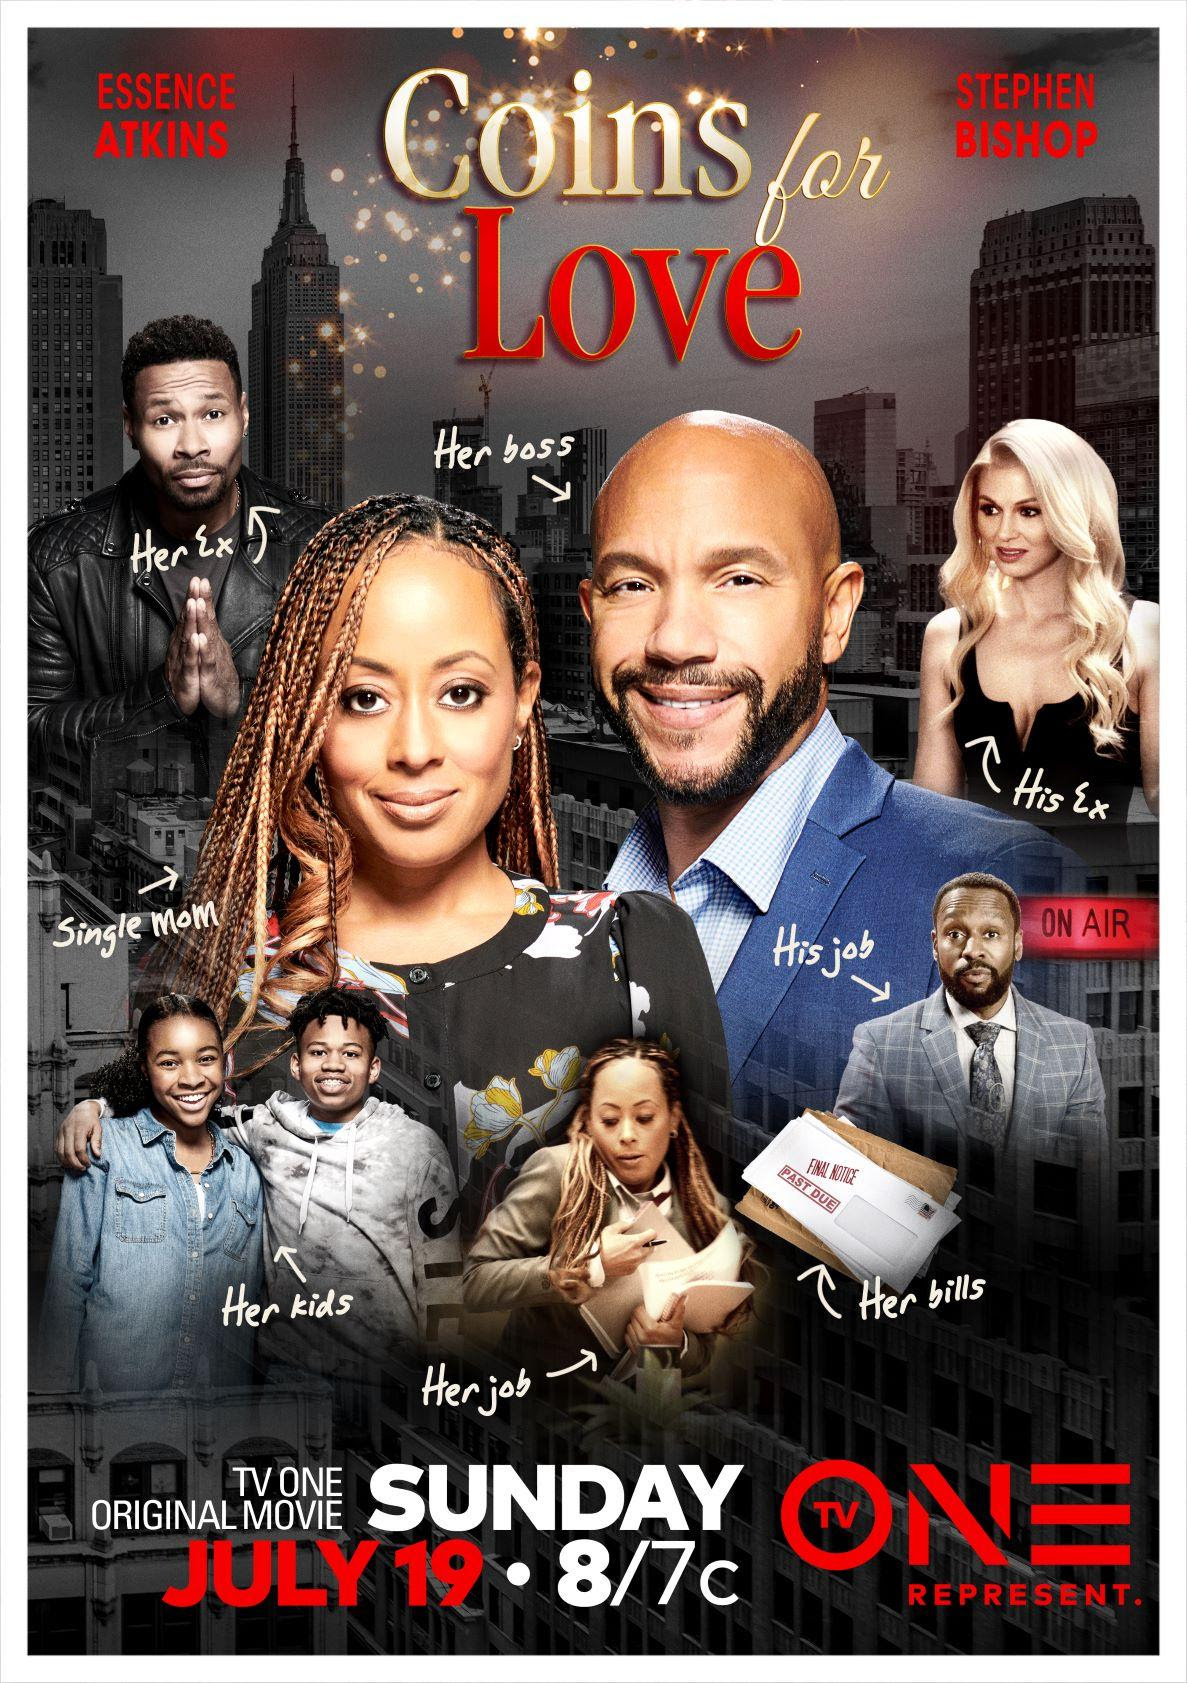 New Movie: Tv One’s ‘Coins For Love’ Starring Essence Atkins & Stephen Bishop